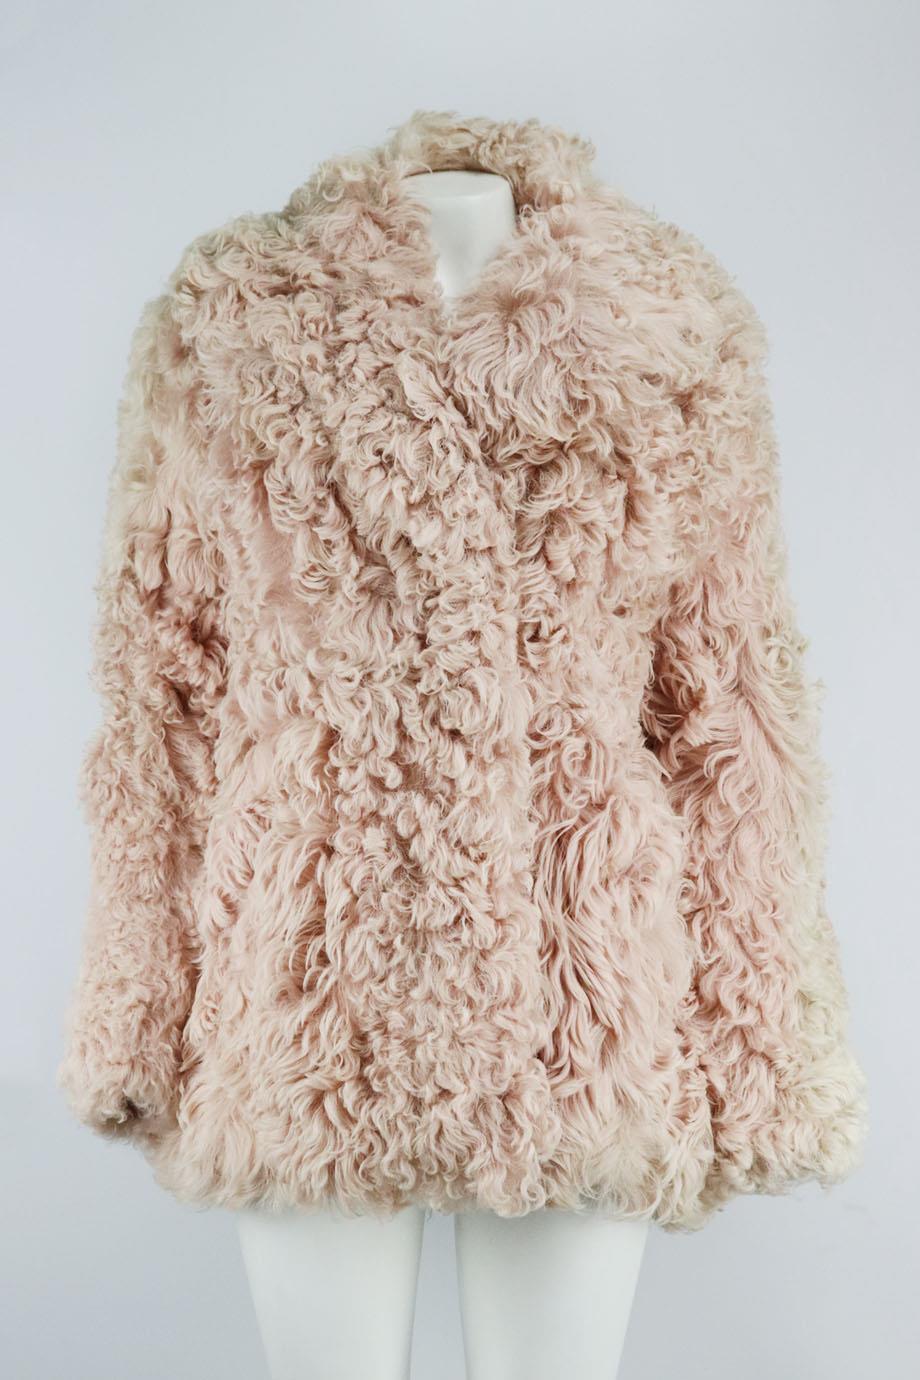 A.L.C. oversized shearling coat. Pink. Hook and eye fastening at front. 100% Shearling; lining: 63% cupro, 37% cotton. Size: XSmall (UK 6, US 2, FR 34, IT 38). Shoulder to shoulder: 18.5 in. Bust: 42 in. Waist: 44.4 in. Hips: 48 in. Length: 31 in